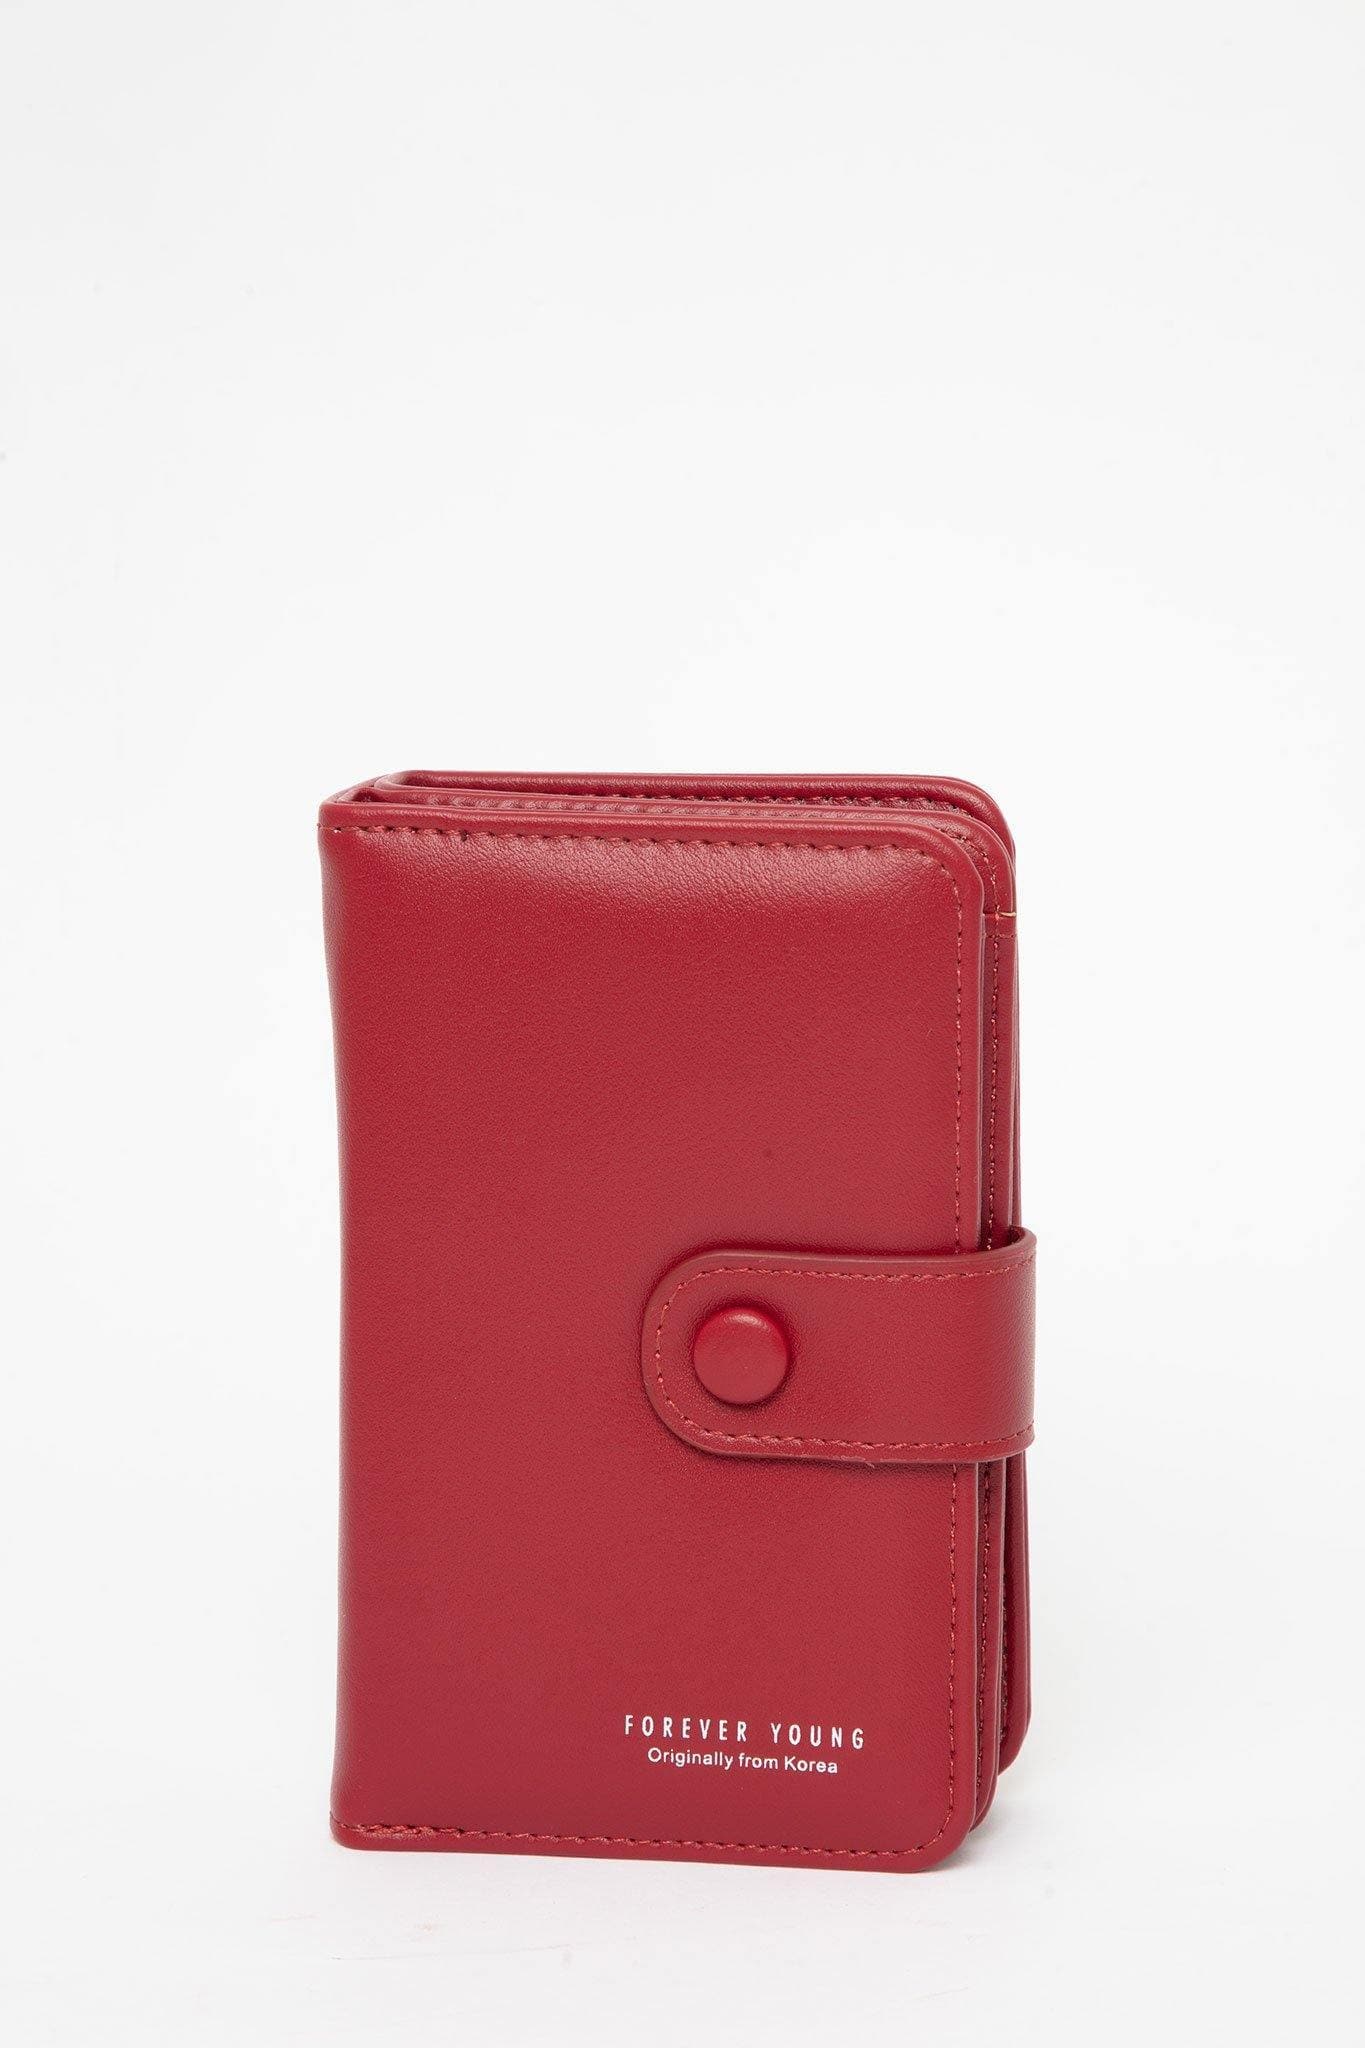 FOREVER YOUNG WOWEN'S WALLET 840W, , CORADO, accessories, red, wallet, women, coradomoda, coradomoda.com